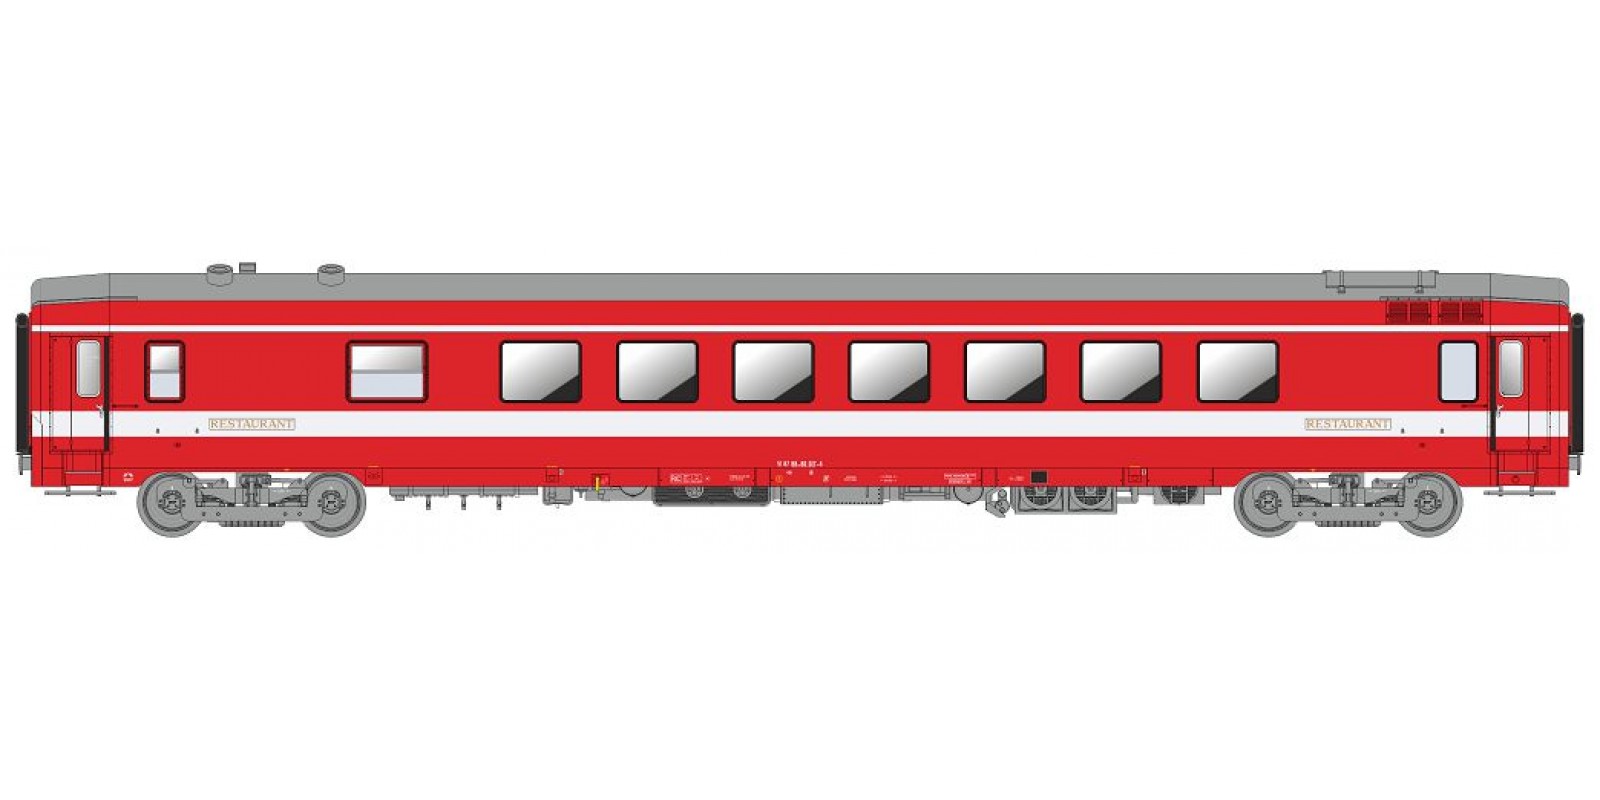 REVB207 Restaurant Car VRU LE CAPITOLE N°17 - Capitole livery EP-IV